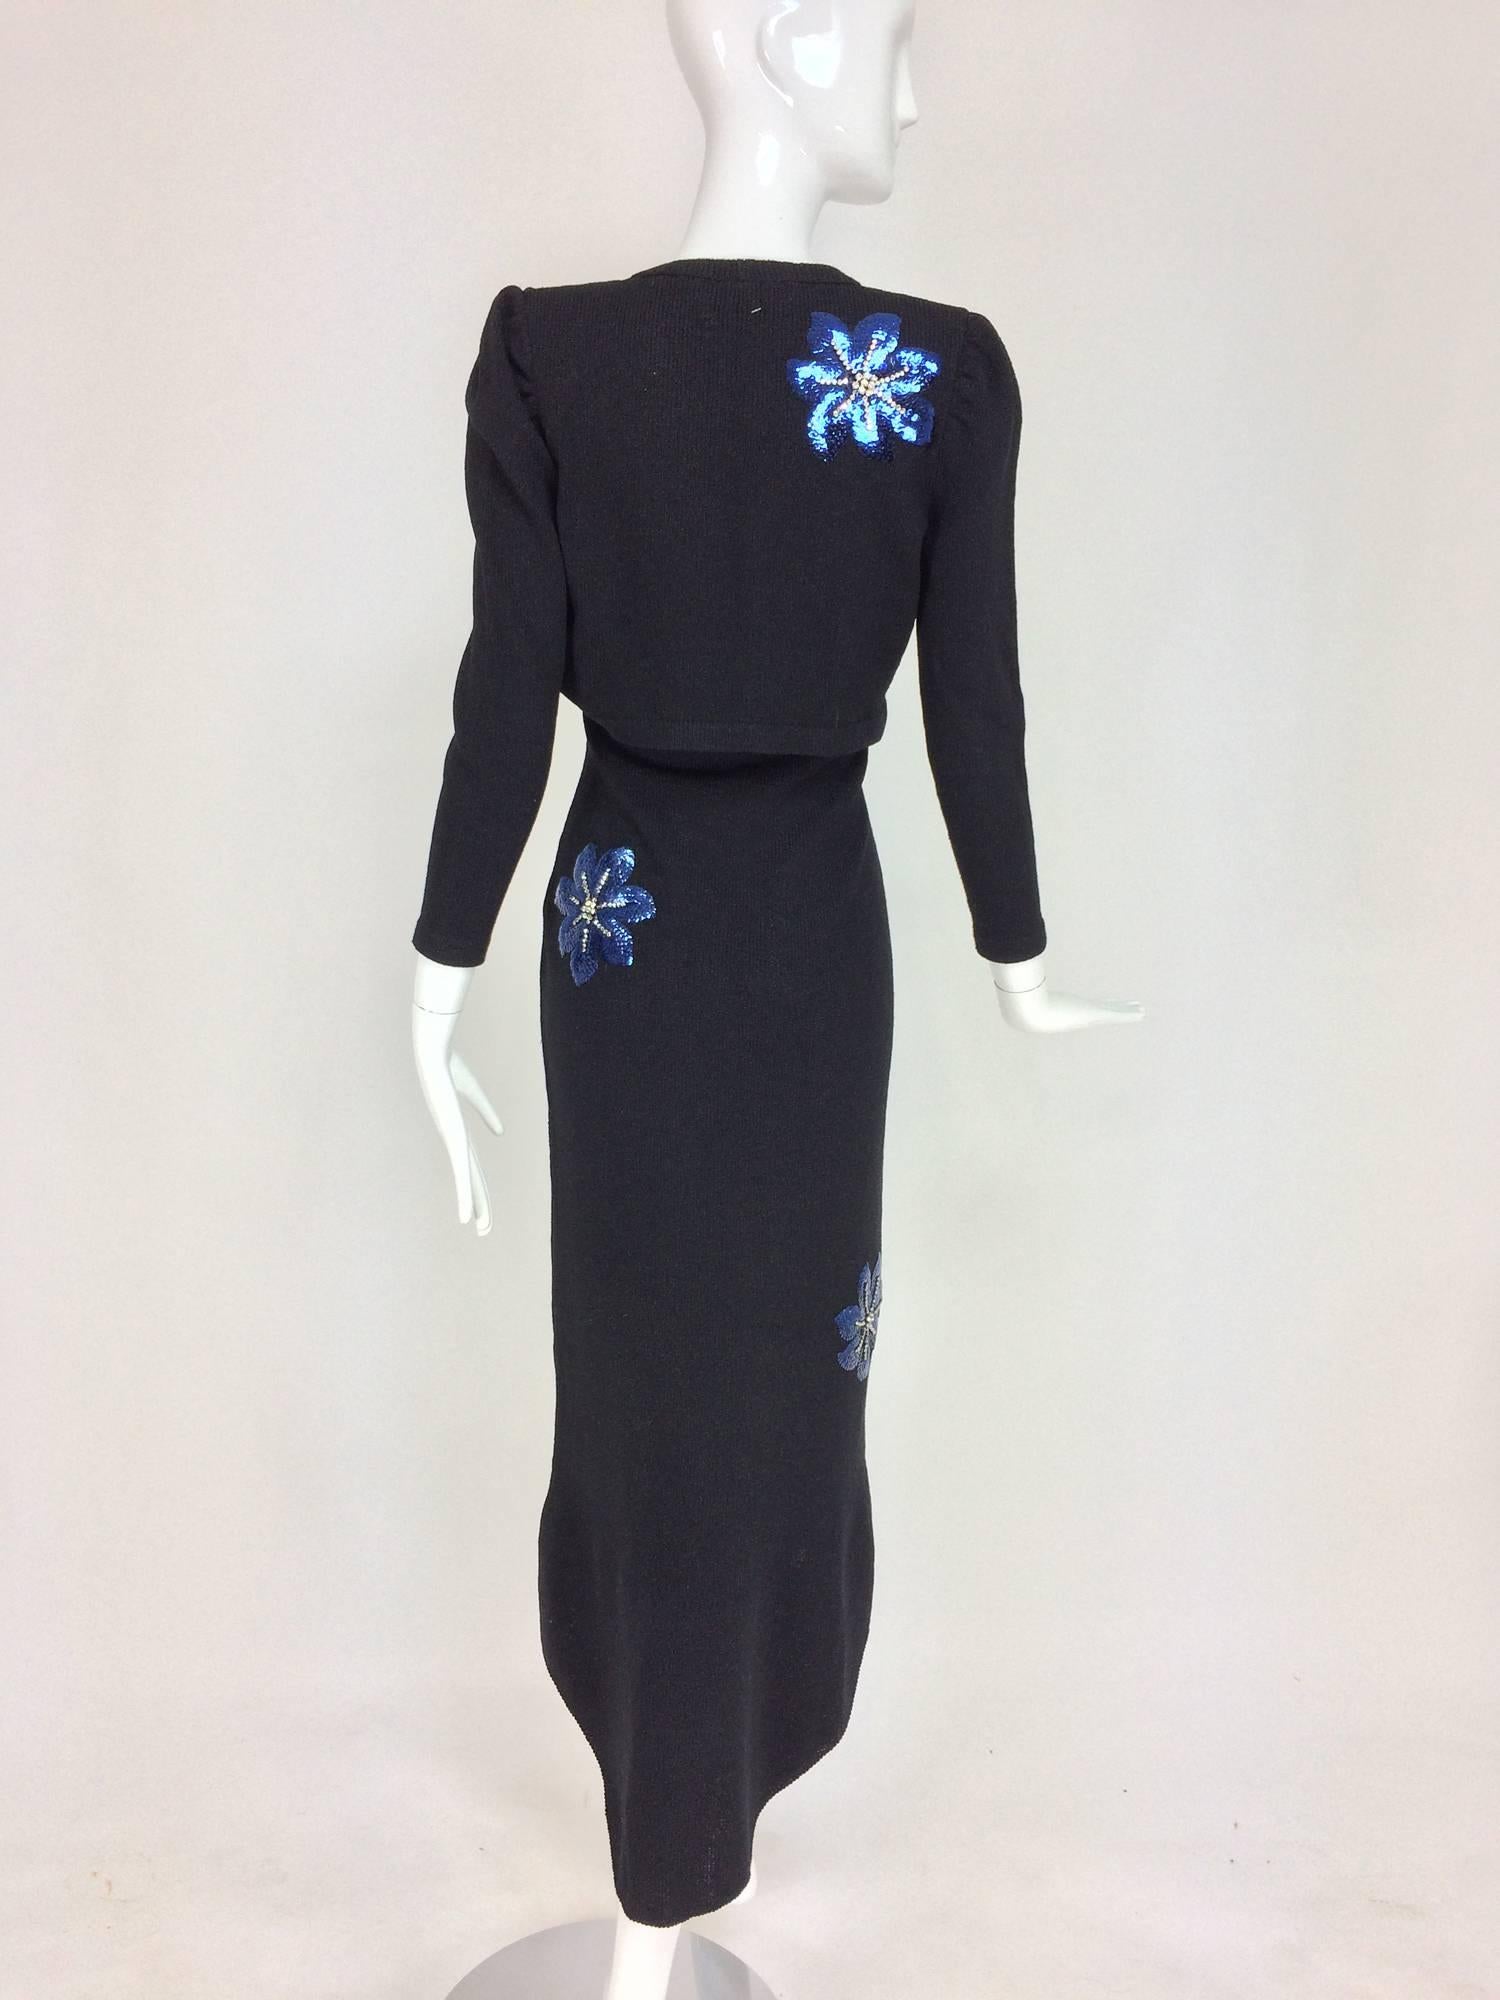 Adolfo 2pc black knit strapless dress and jacket with sequin flowers 1970s 1